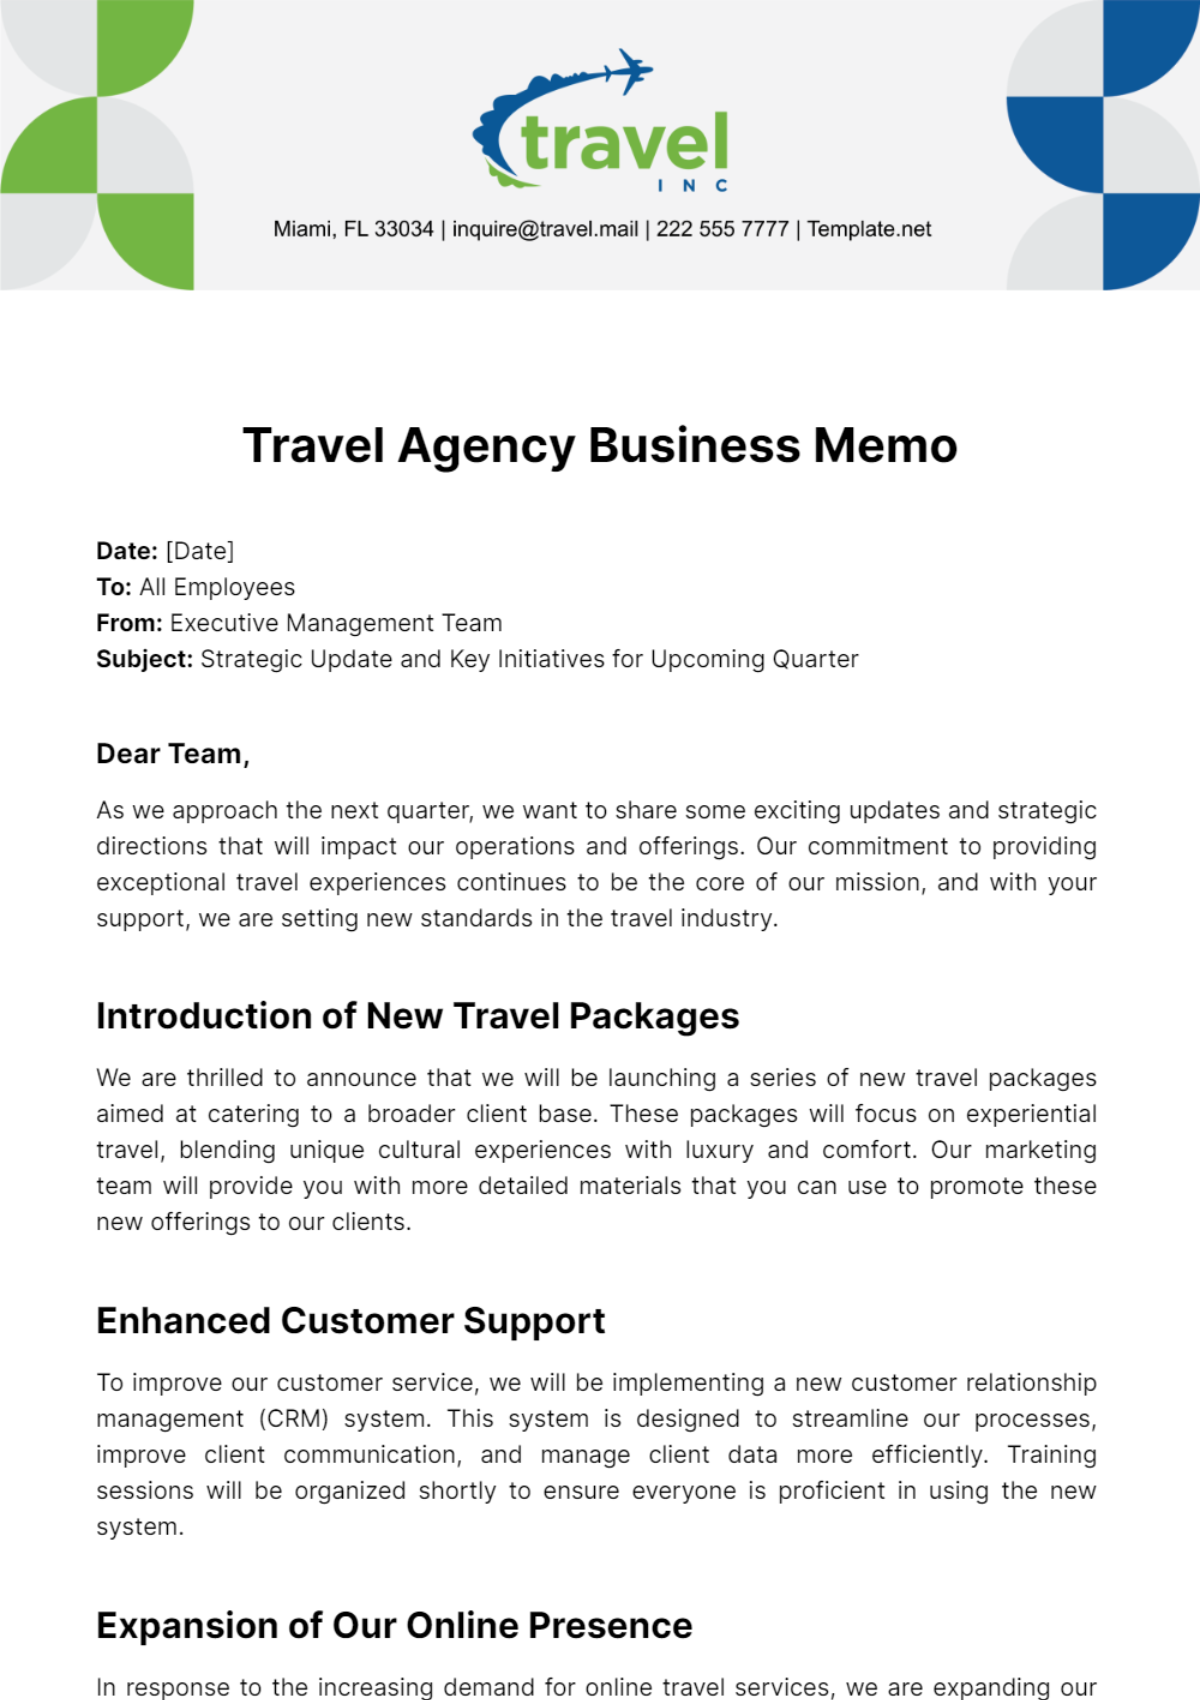 Free Travel Agency Business Memo Template